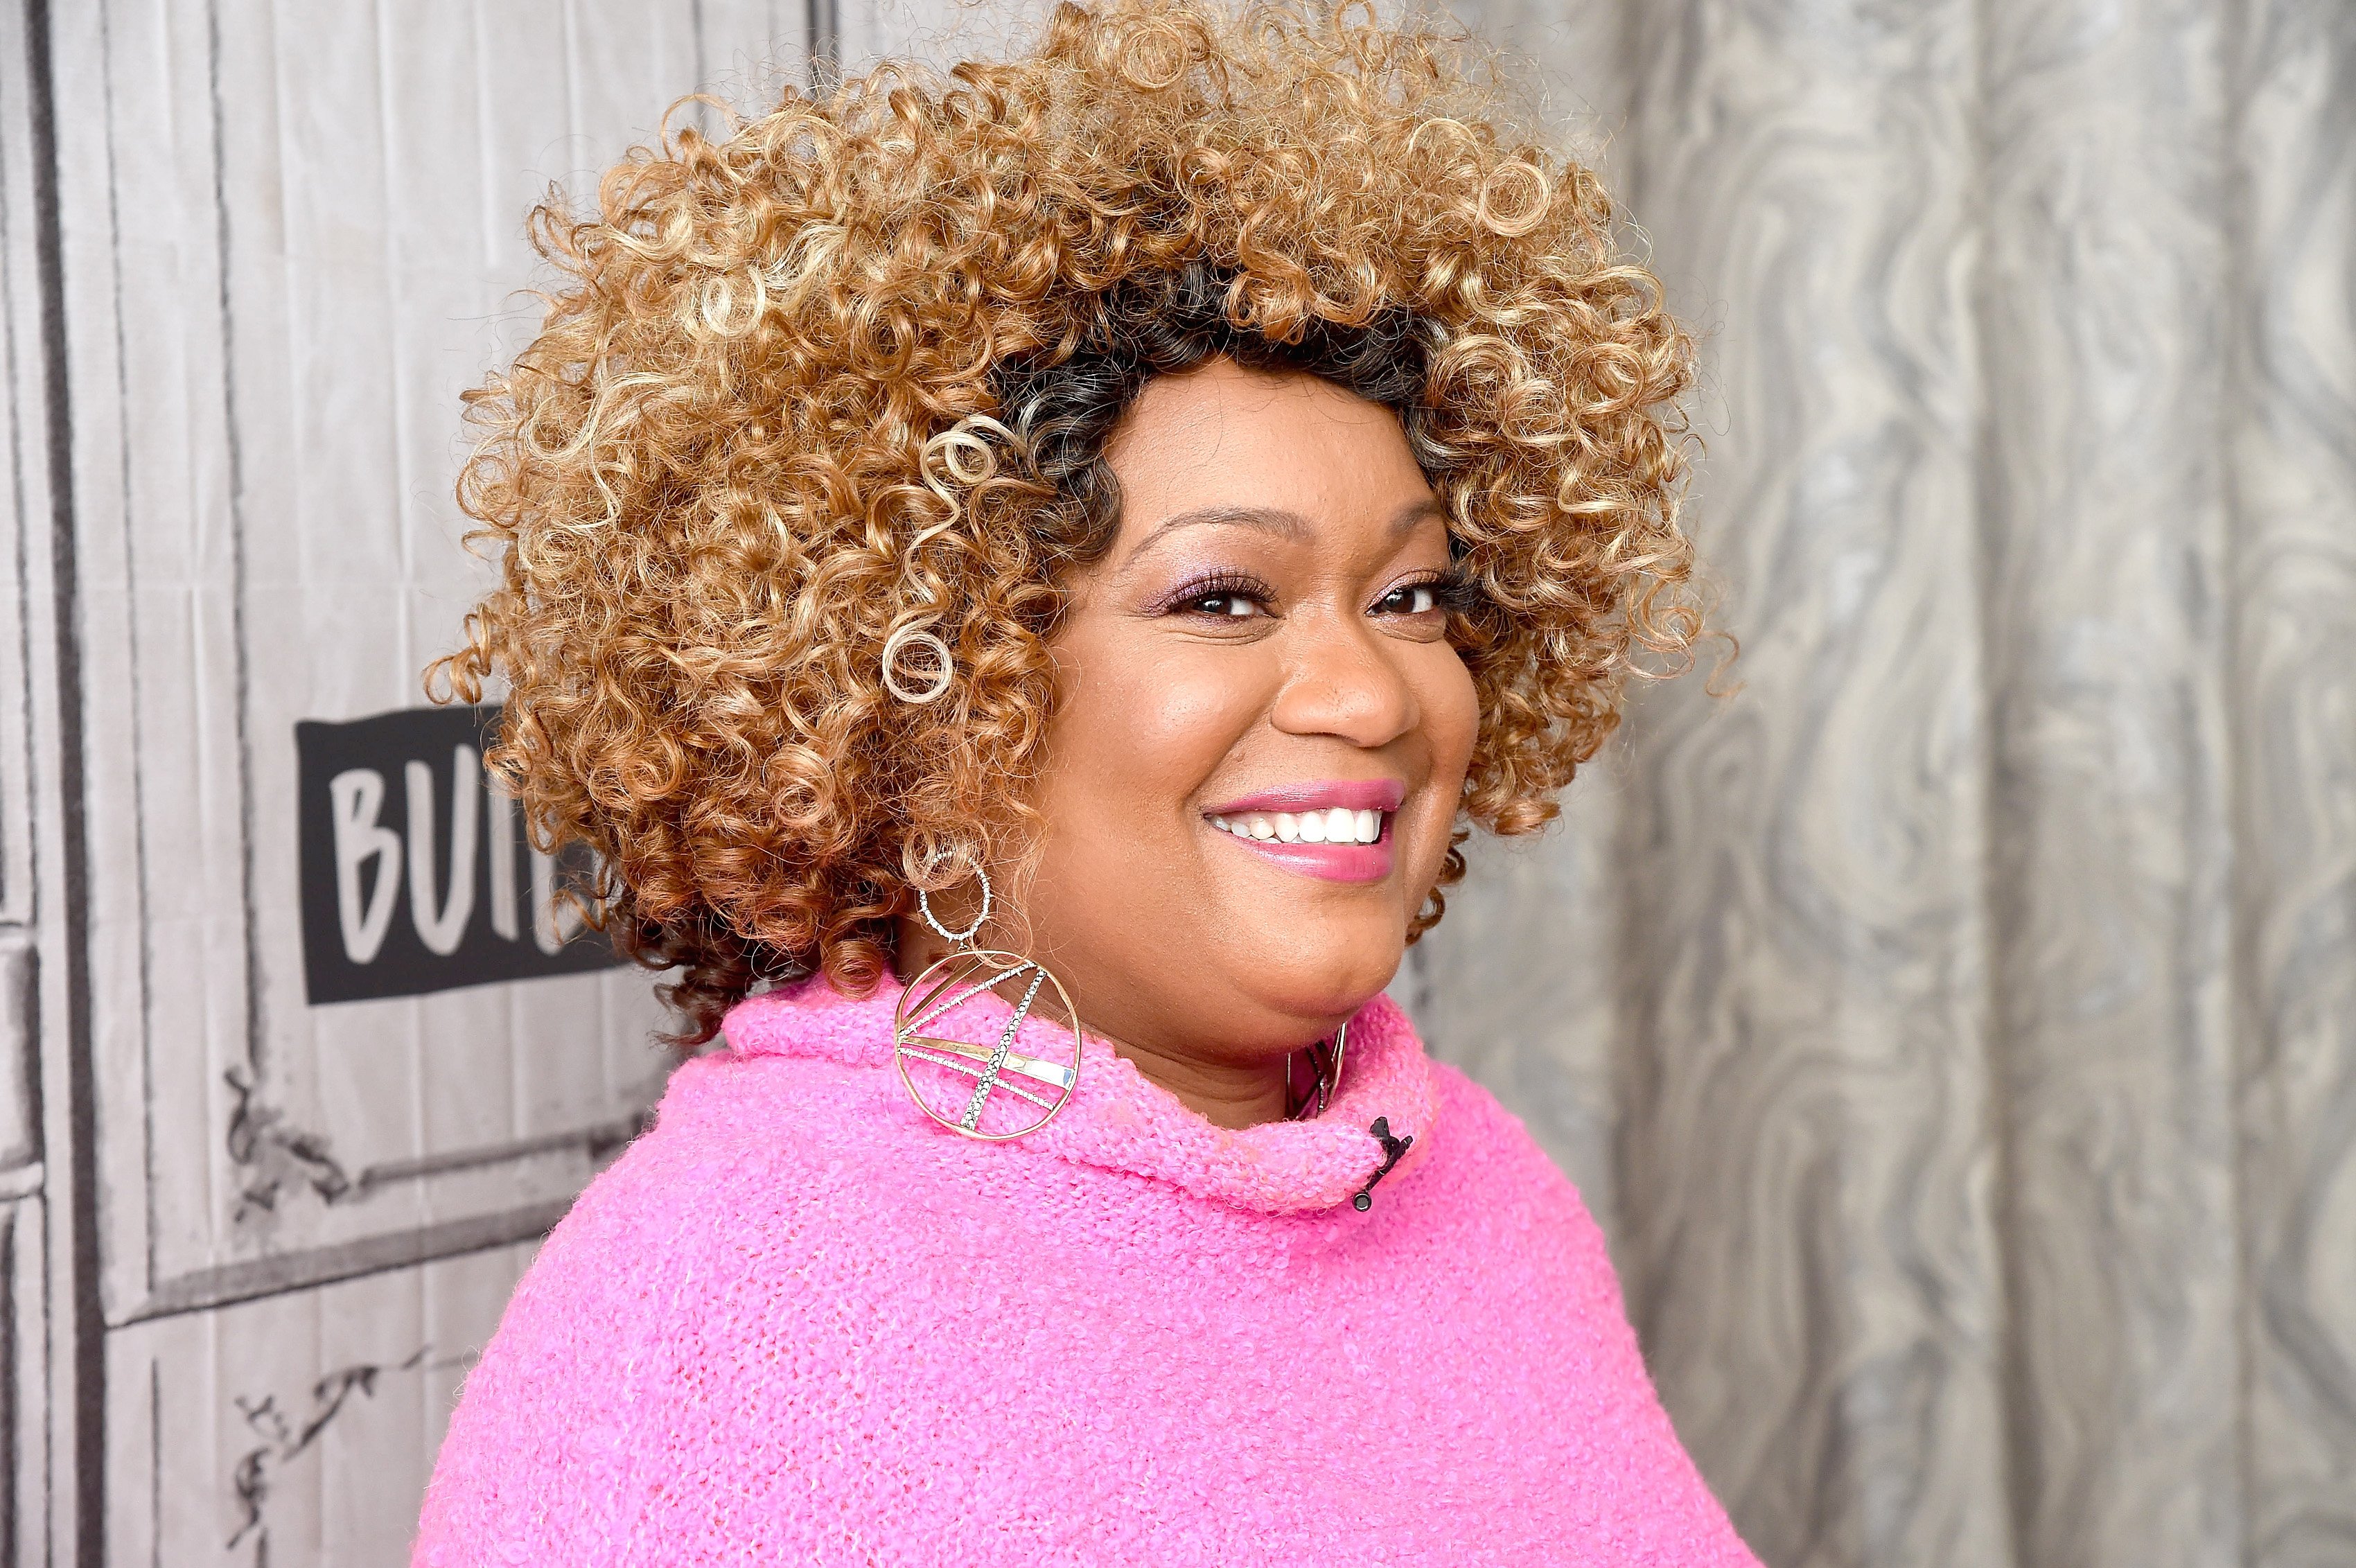 Celebrity chef Sunny Anderson wears a pink sweater in this photograph.